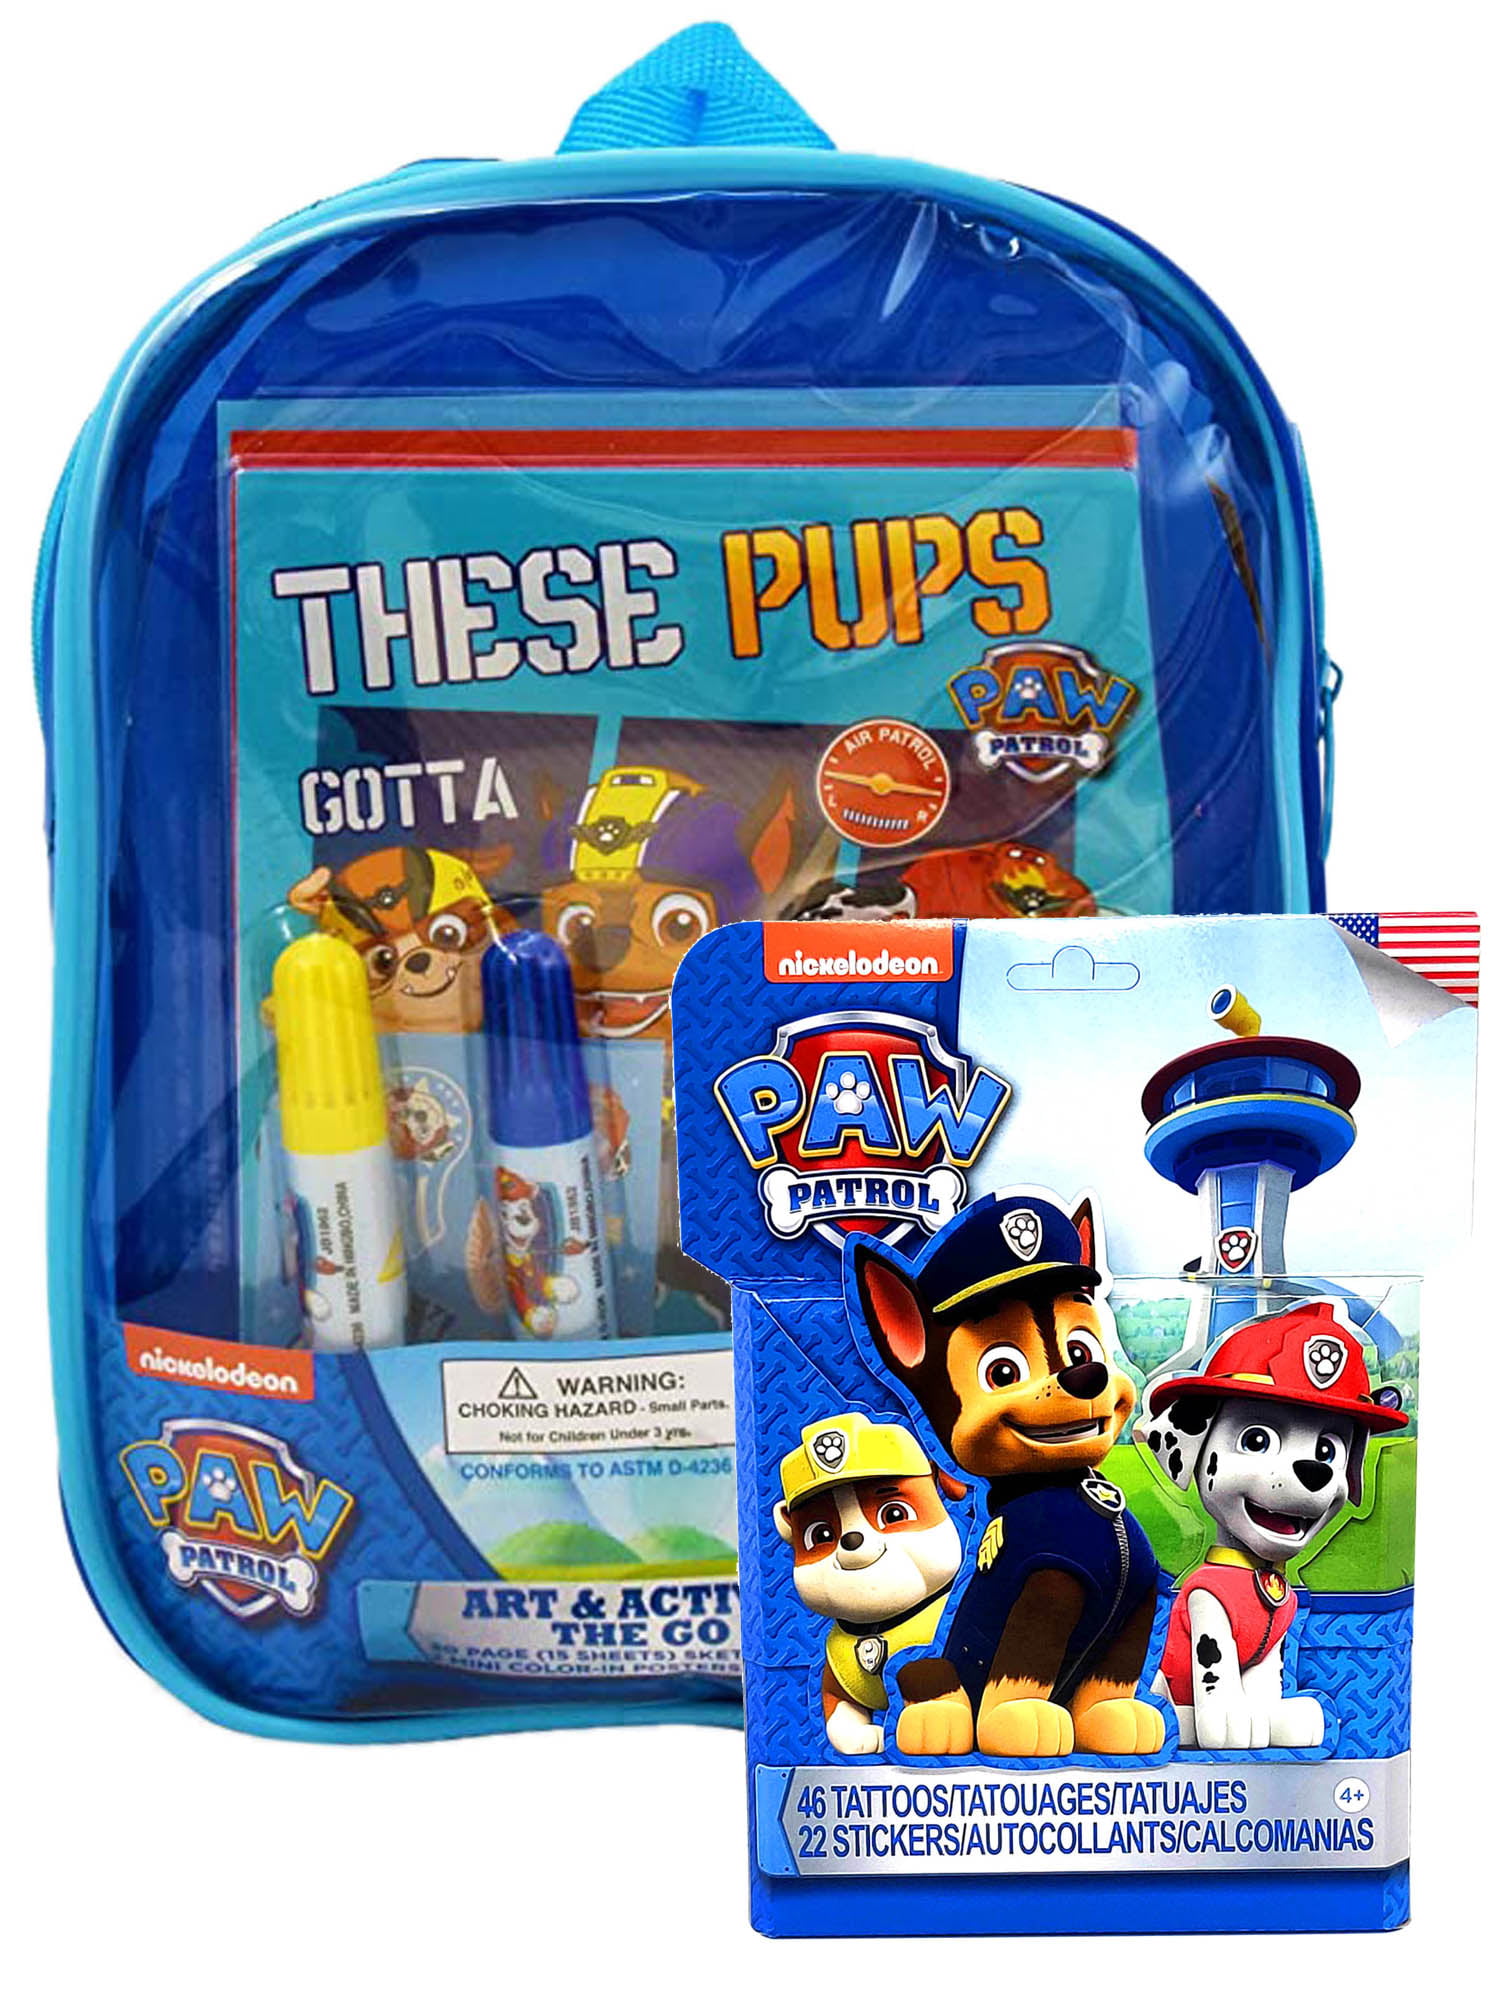 Kids Paw Patrol 46 Tattoos and 22 Stickers Activity Set 4 Pack 